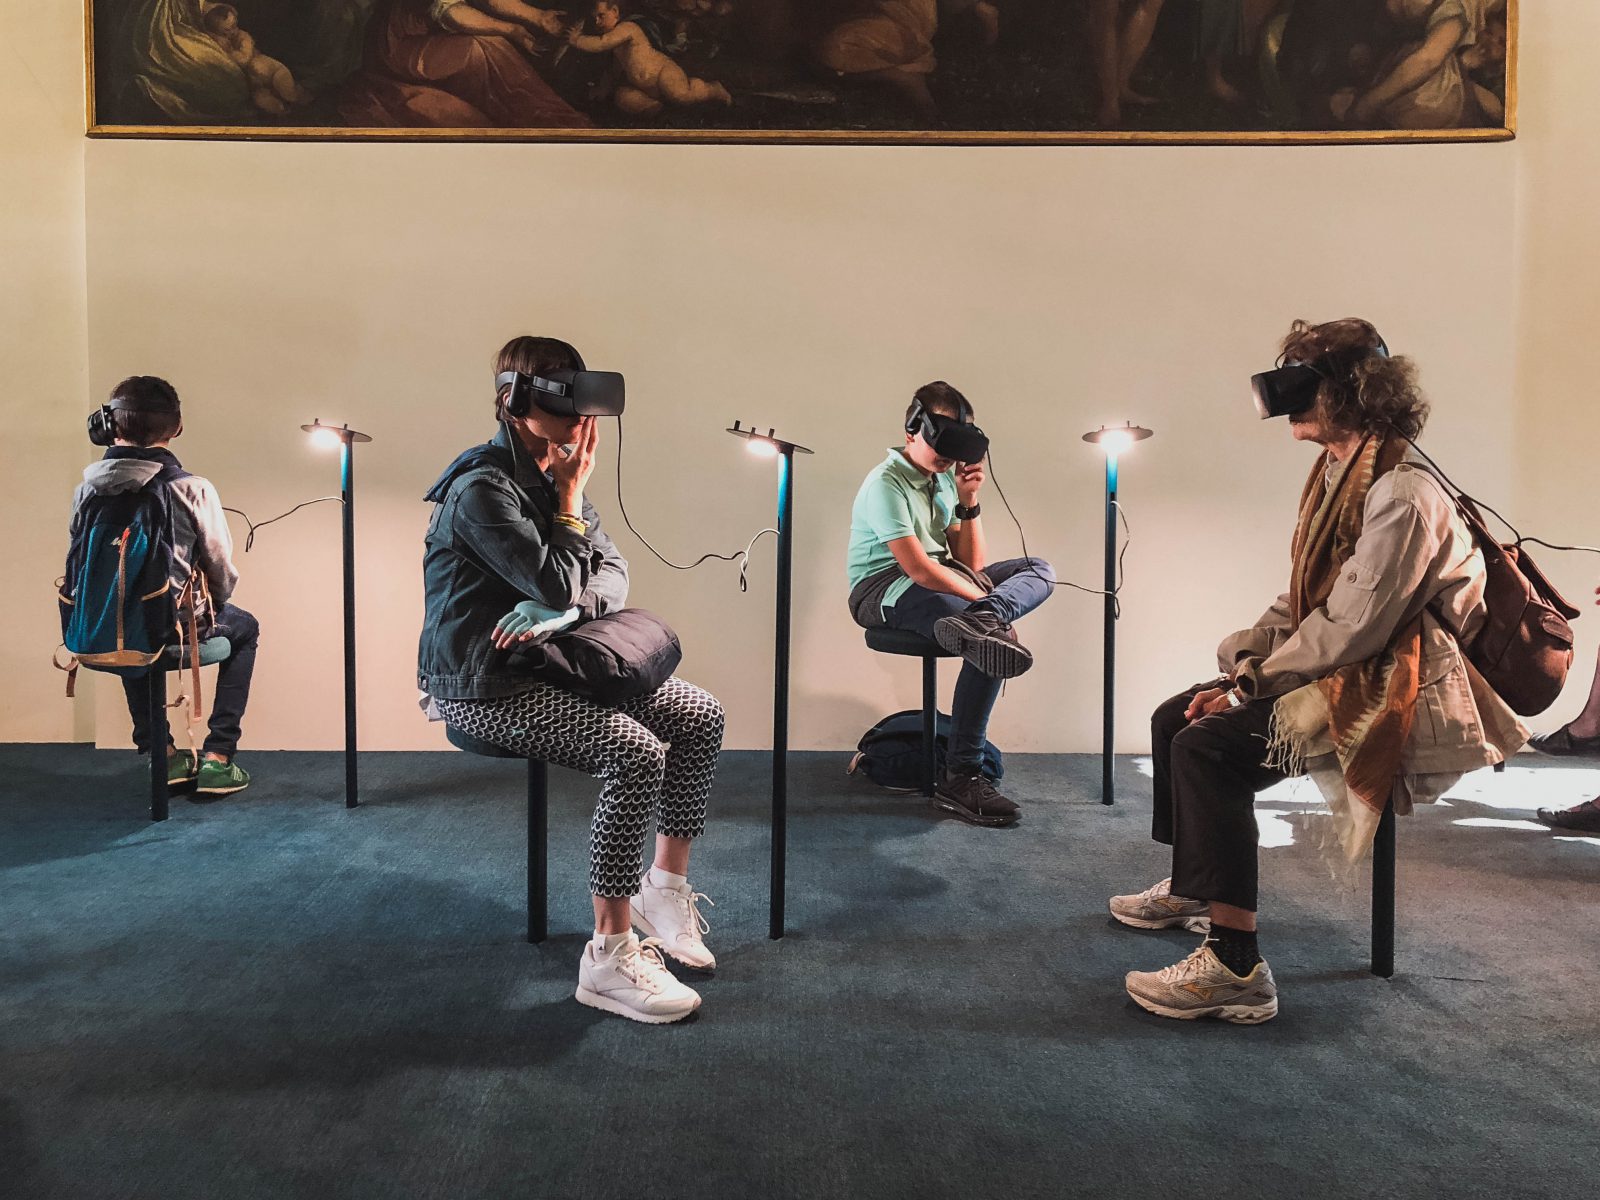 Now, in the age of the Metaverse, something else is here … and it is even creepier. “Augmented reality babies” offer users the virtual experience of “parenting” an algorithm designed to behave like a real baby.